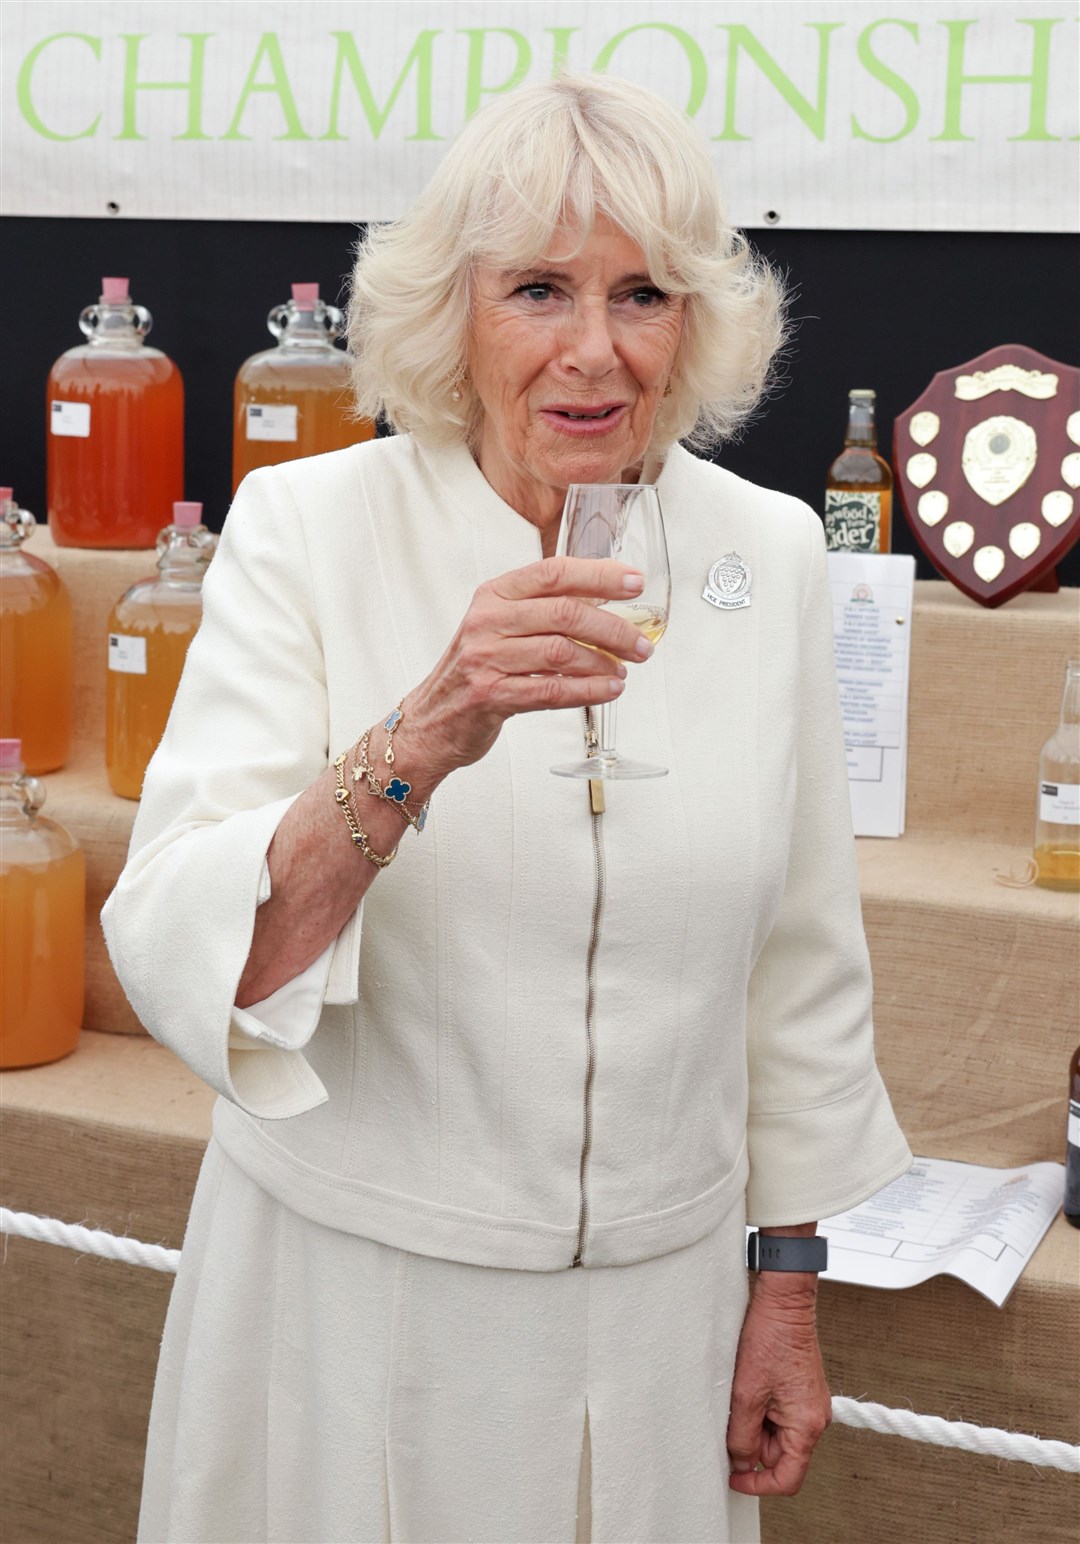 The Duchess of Cornwall described the sparkling cider as ‘smooth and refreshing’ (PA)